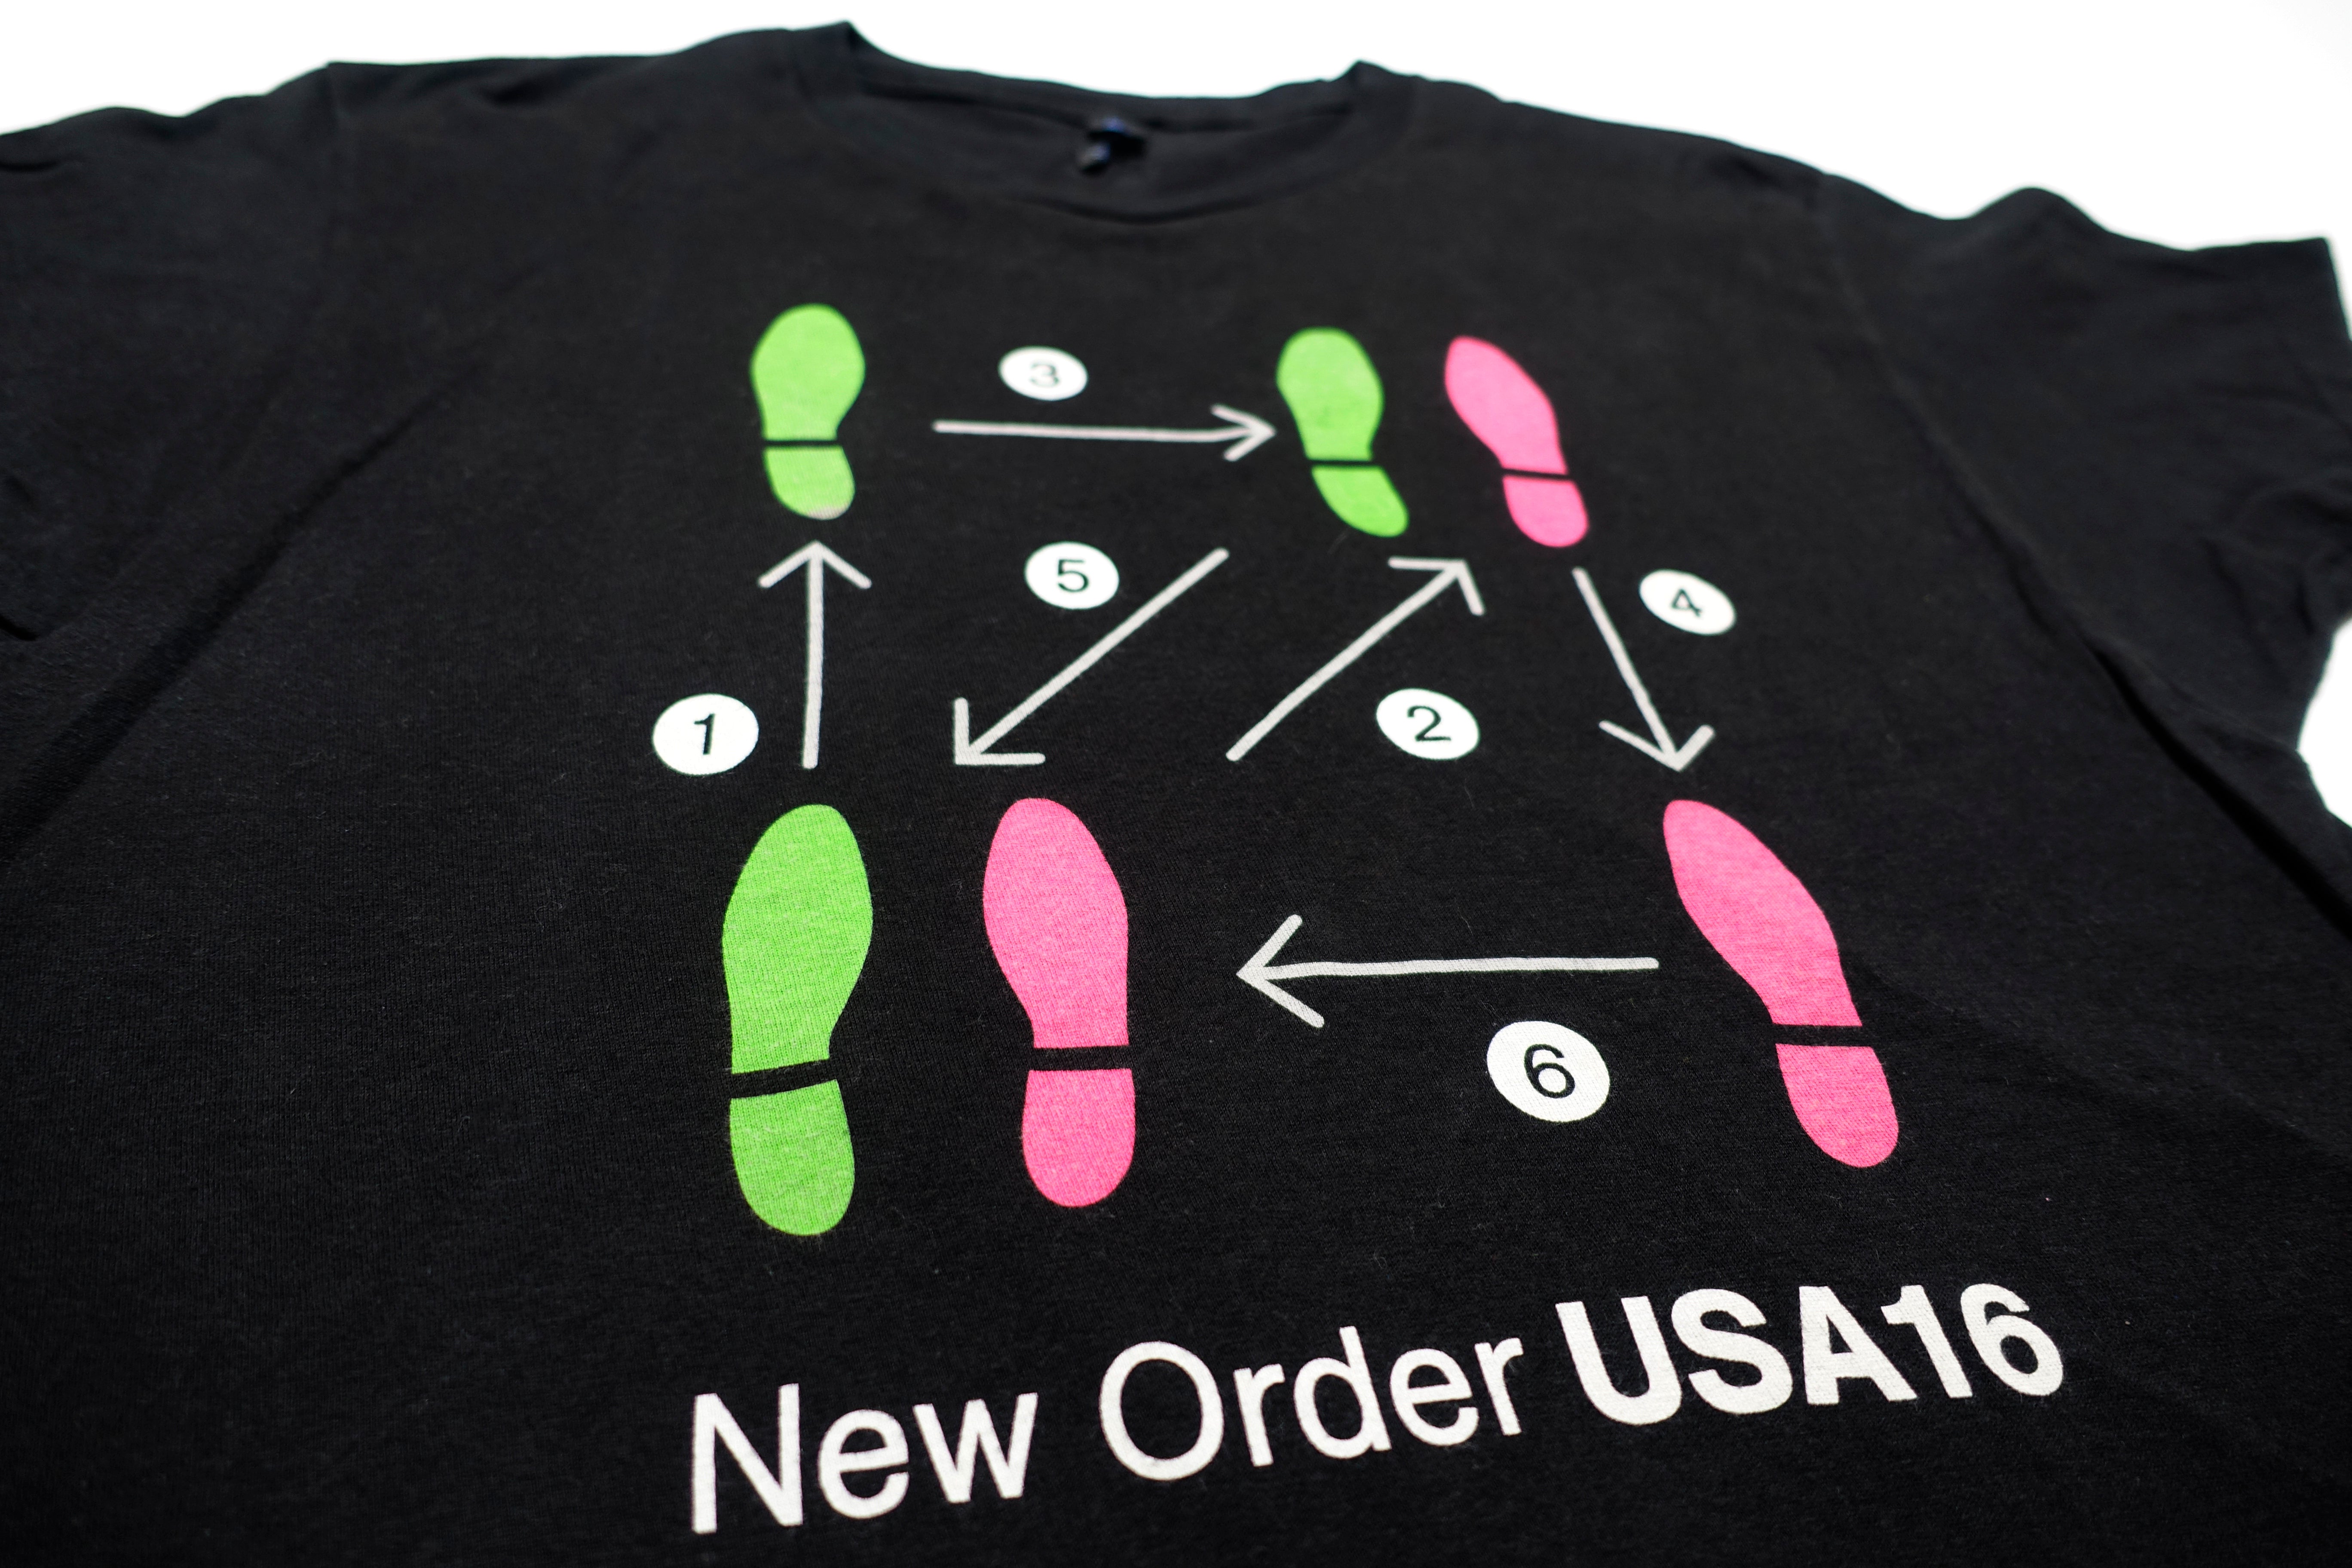 New Order - Music Complete USA 2016 Tour Shirt Size Large